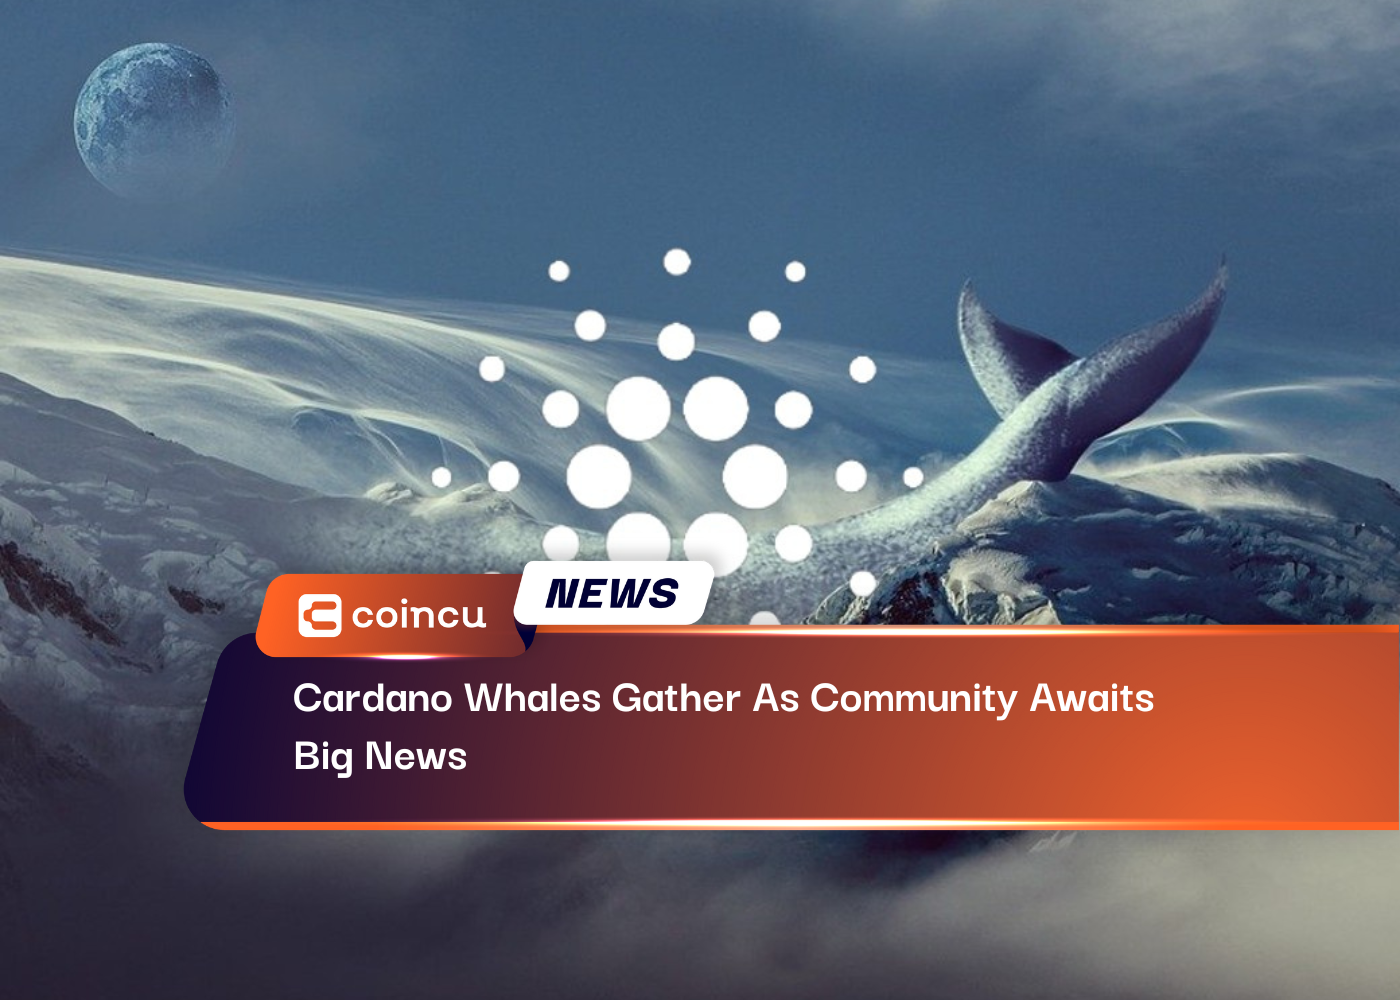 Cardano Whales Gather As Community Awaits